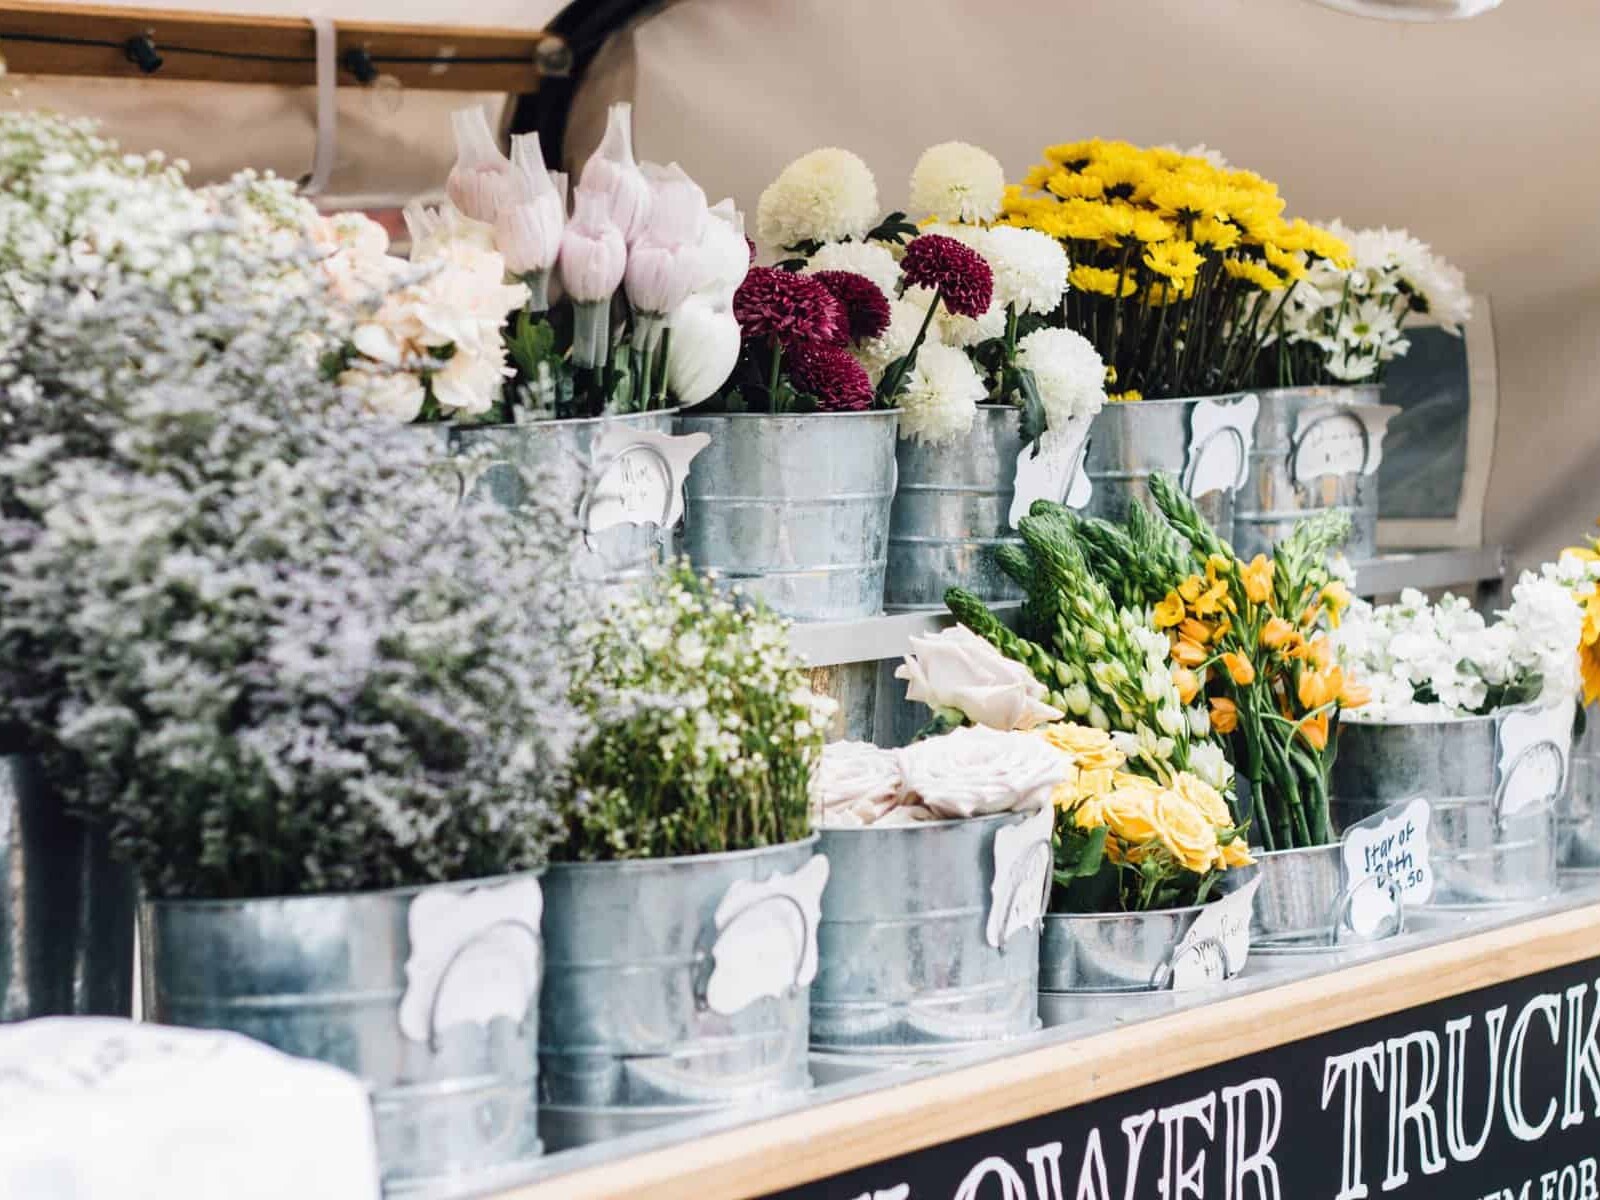 A shot of flowers for sale at Amelia's Flower Truck in Nashville